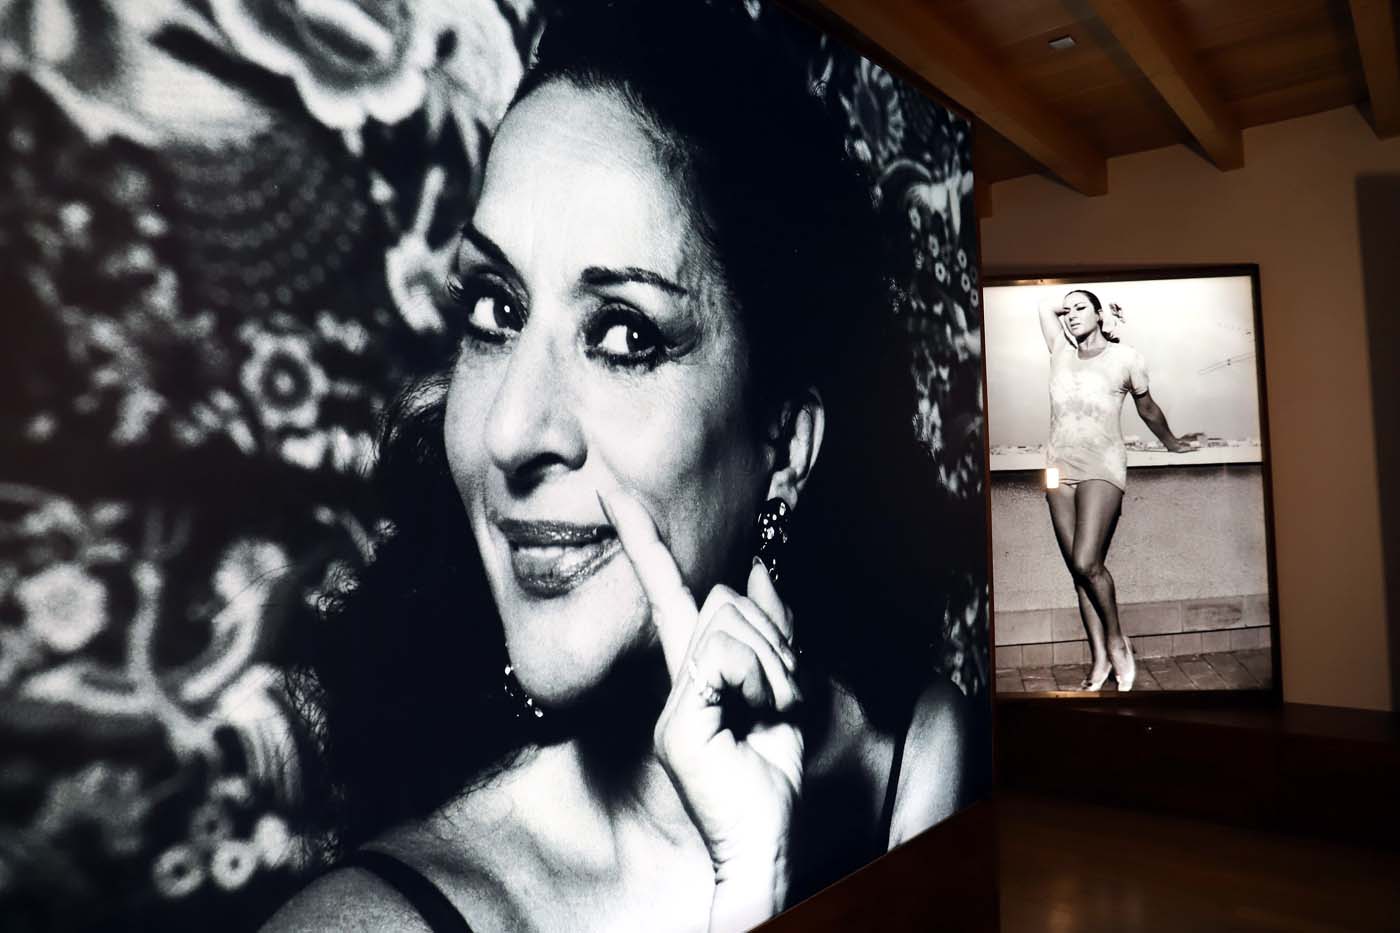 MAIN MUSEUMS ABOUT FLAMENCO ARTISTS IN THE PROVINCE OF CÁDIZ - HACE